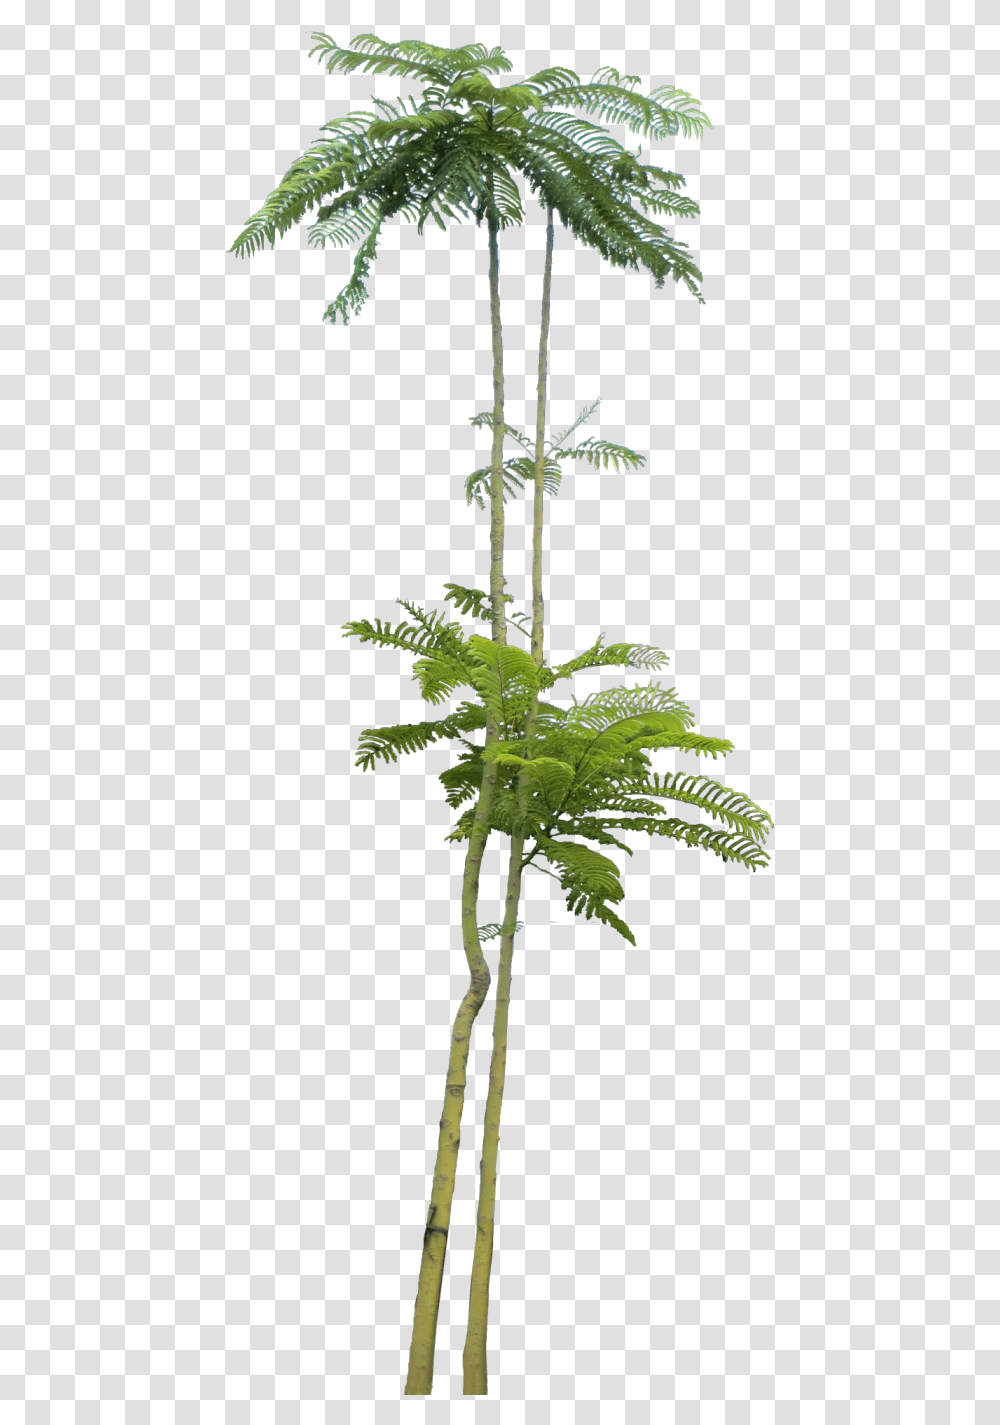 A Collection Of Tropical And Subtropical Plant Images Free Tree Photoshop Plant, Palm Tree, Arecaceae, Leaf, Conifer Transparent Png